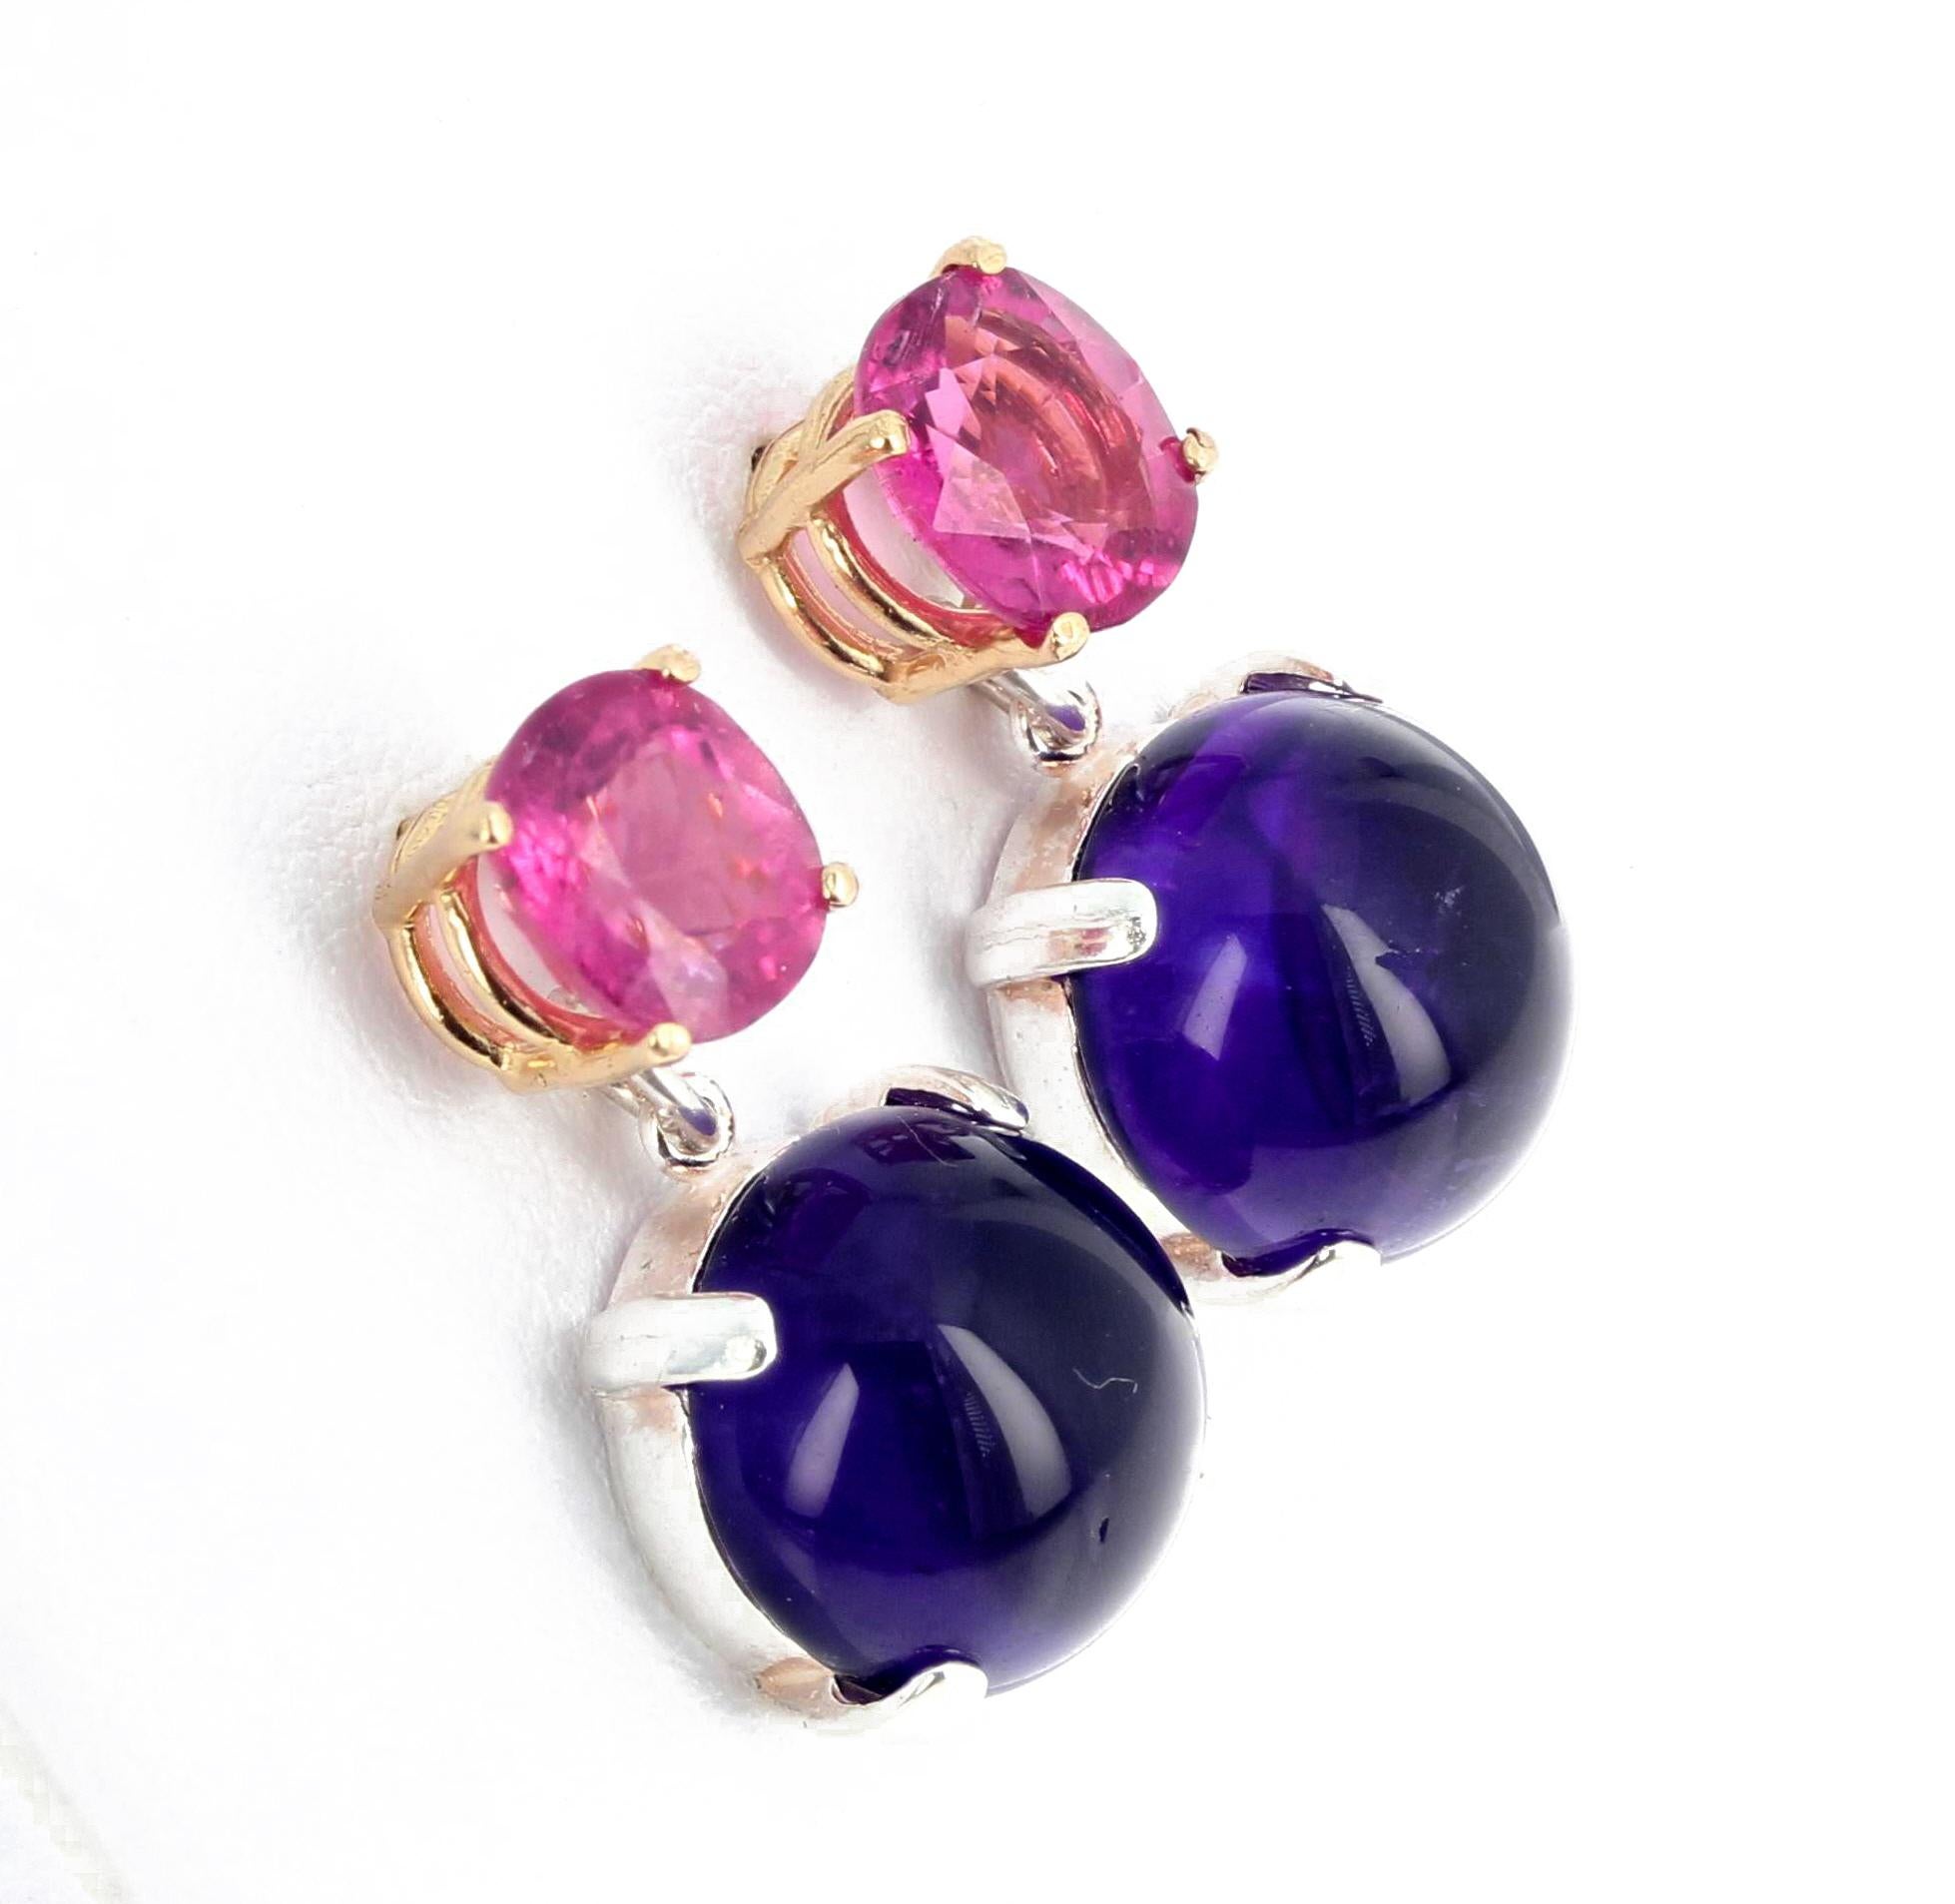 Glamorous elegant 8 mm x 7 mm brilliant pink natural Tourmalines set in 14Kt yellow gold custom made stud earrings elegantly dangle 13 mm round bright glowing Amethyst studs set in Sterling Silver.  The combination of the two metals makes them stand